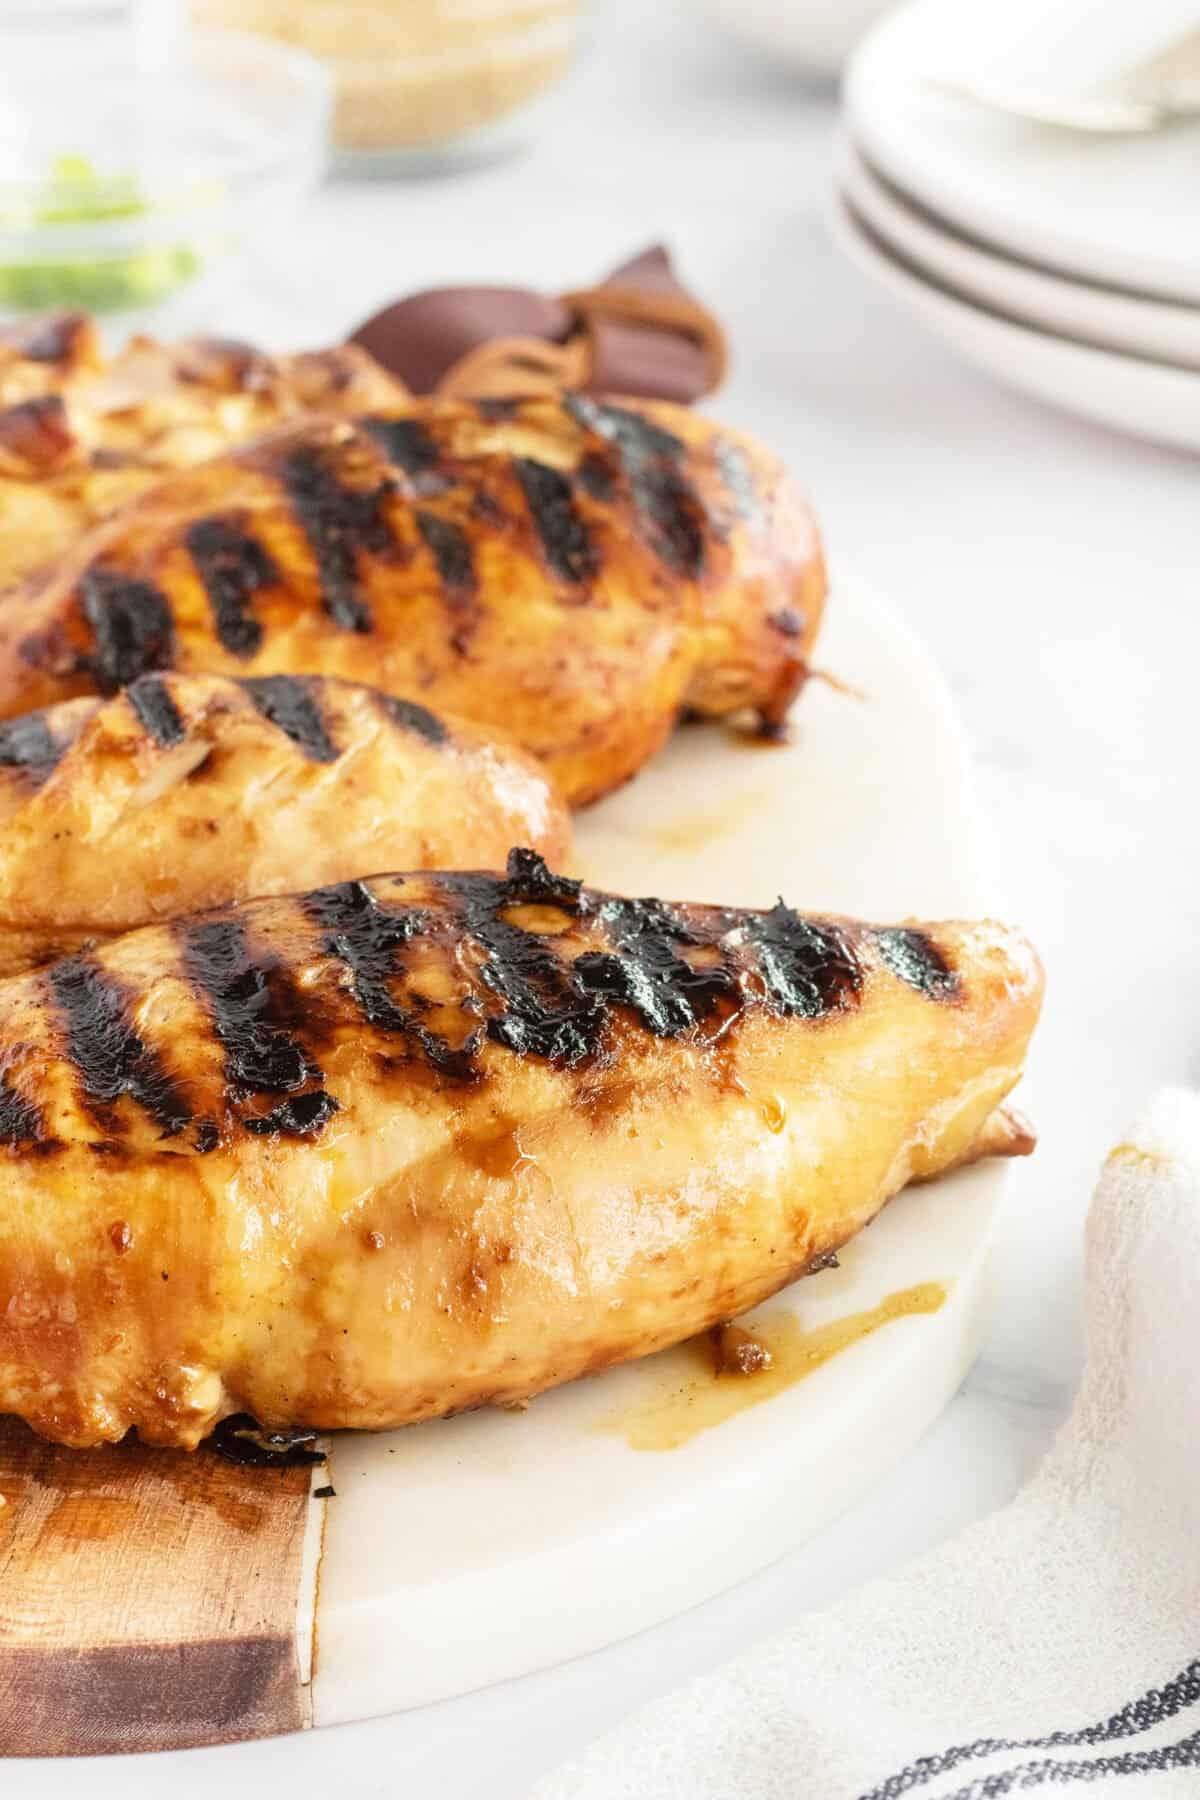 Grilled teriyaki chicken on a white plate